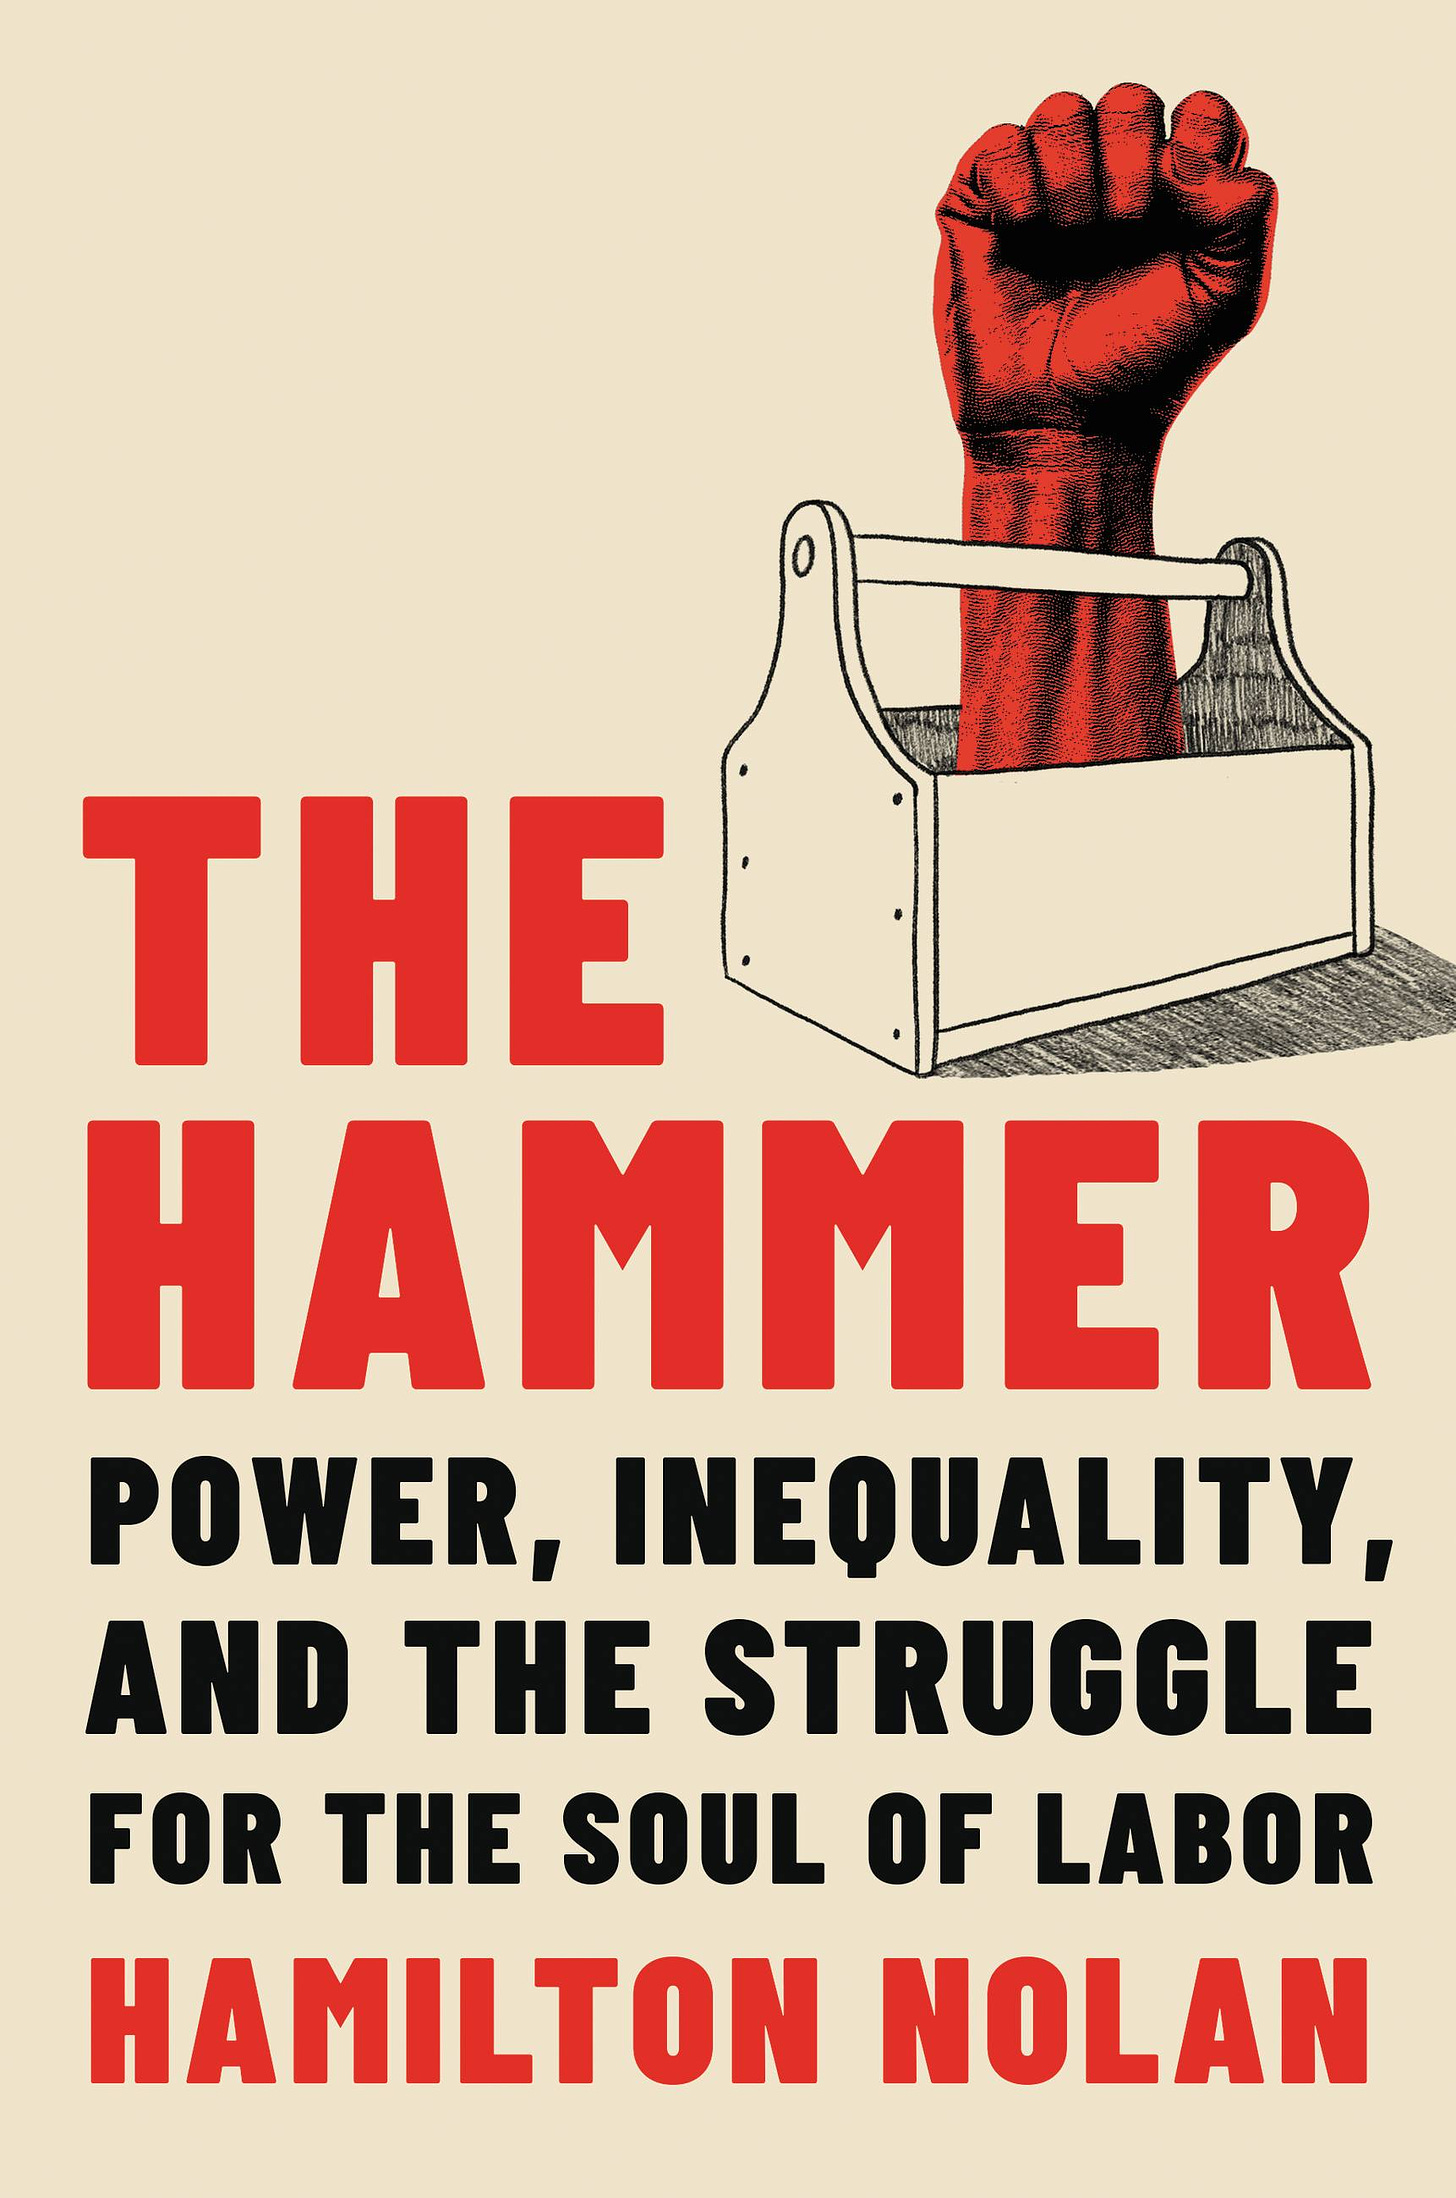 AN IMAGE OF THE BOOK COVER FOR HAMILTON NOLAN'S BOOK "THE HAMMER: POWER, INEQUALITY, AND THE STRUGGLE FOR THE SOUL OF LABOR